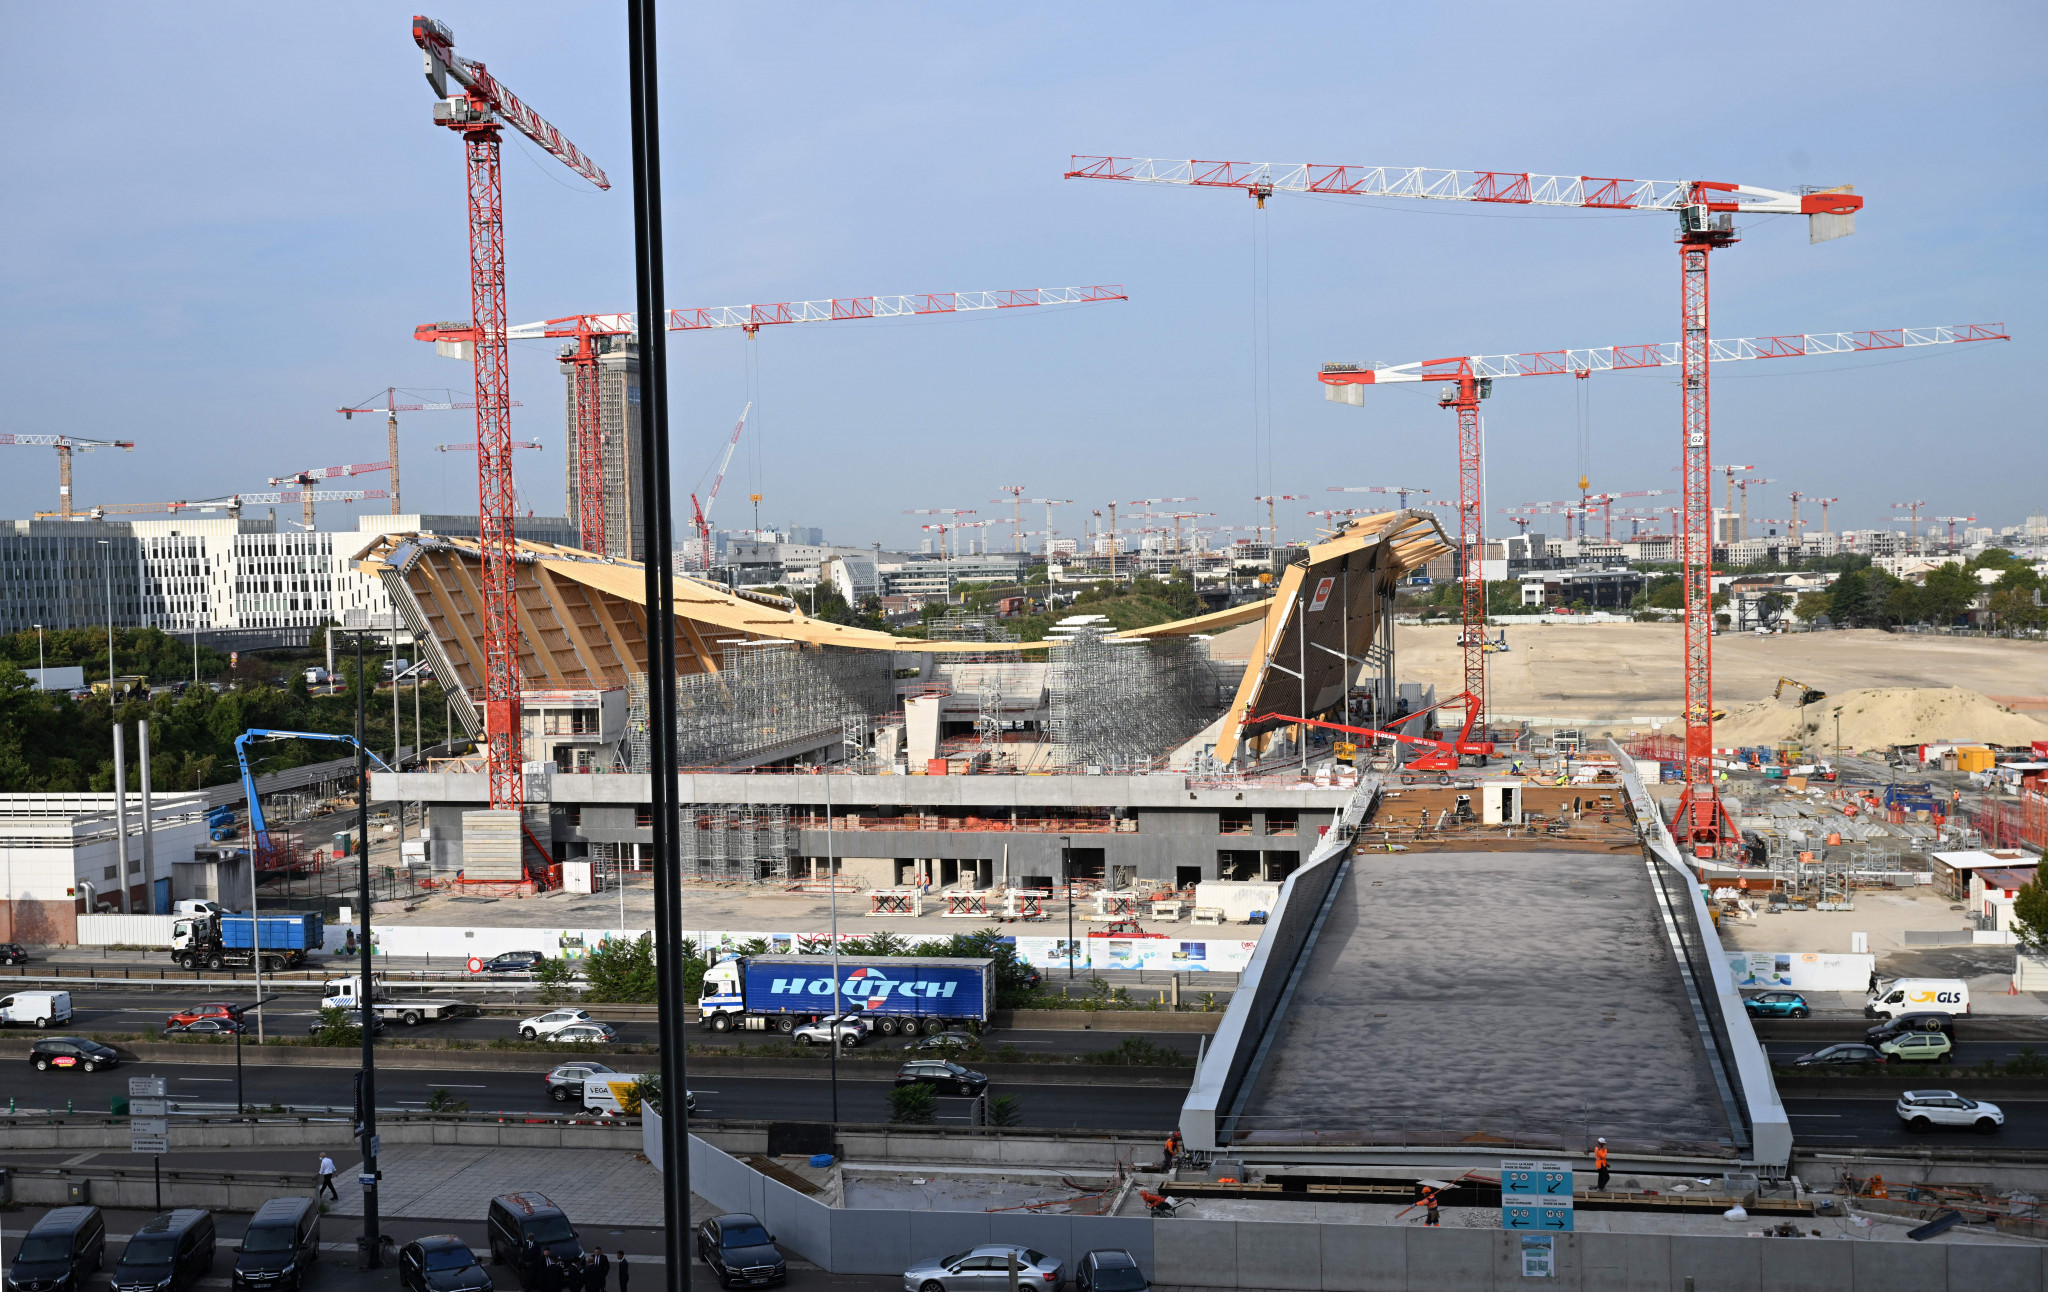 The Olympic Aquatics Centre is under construction in Seine-Saint-Denis ©Getty Images